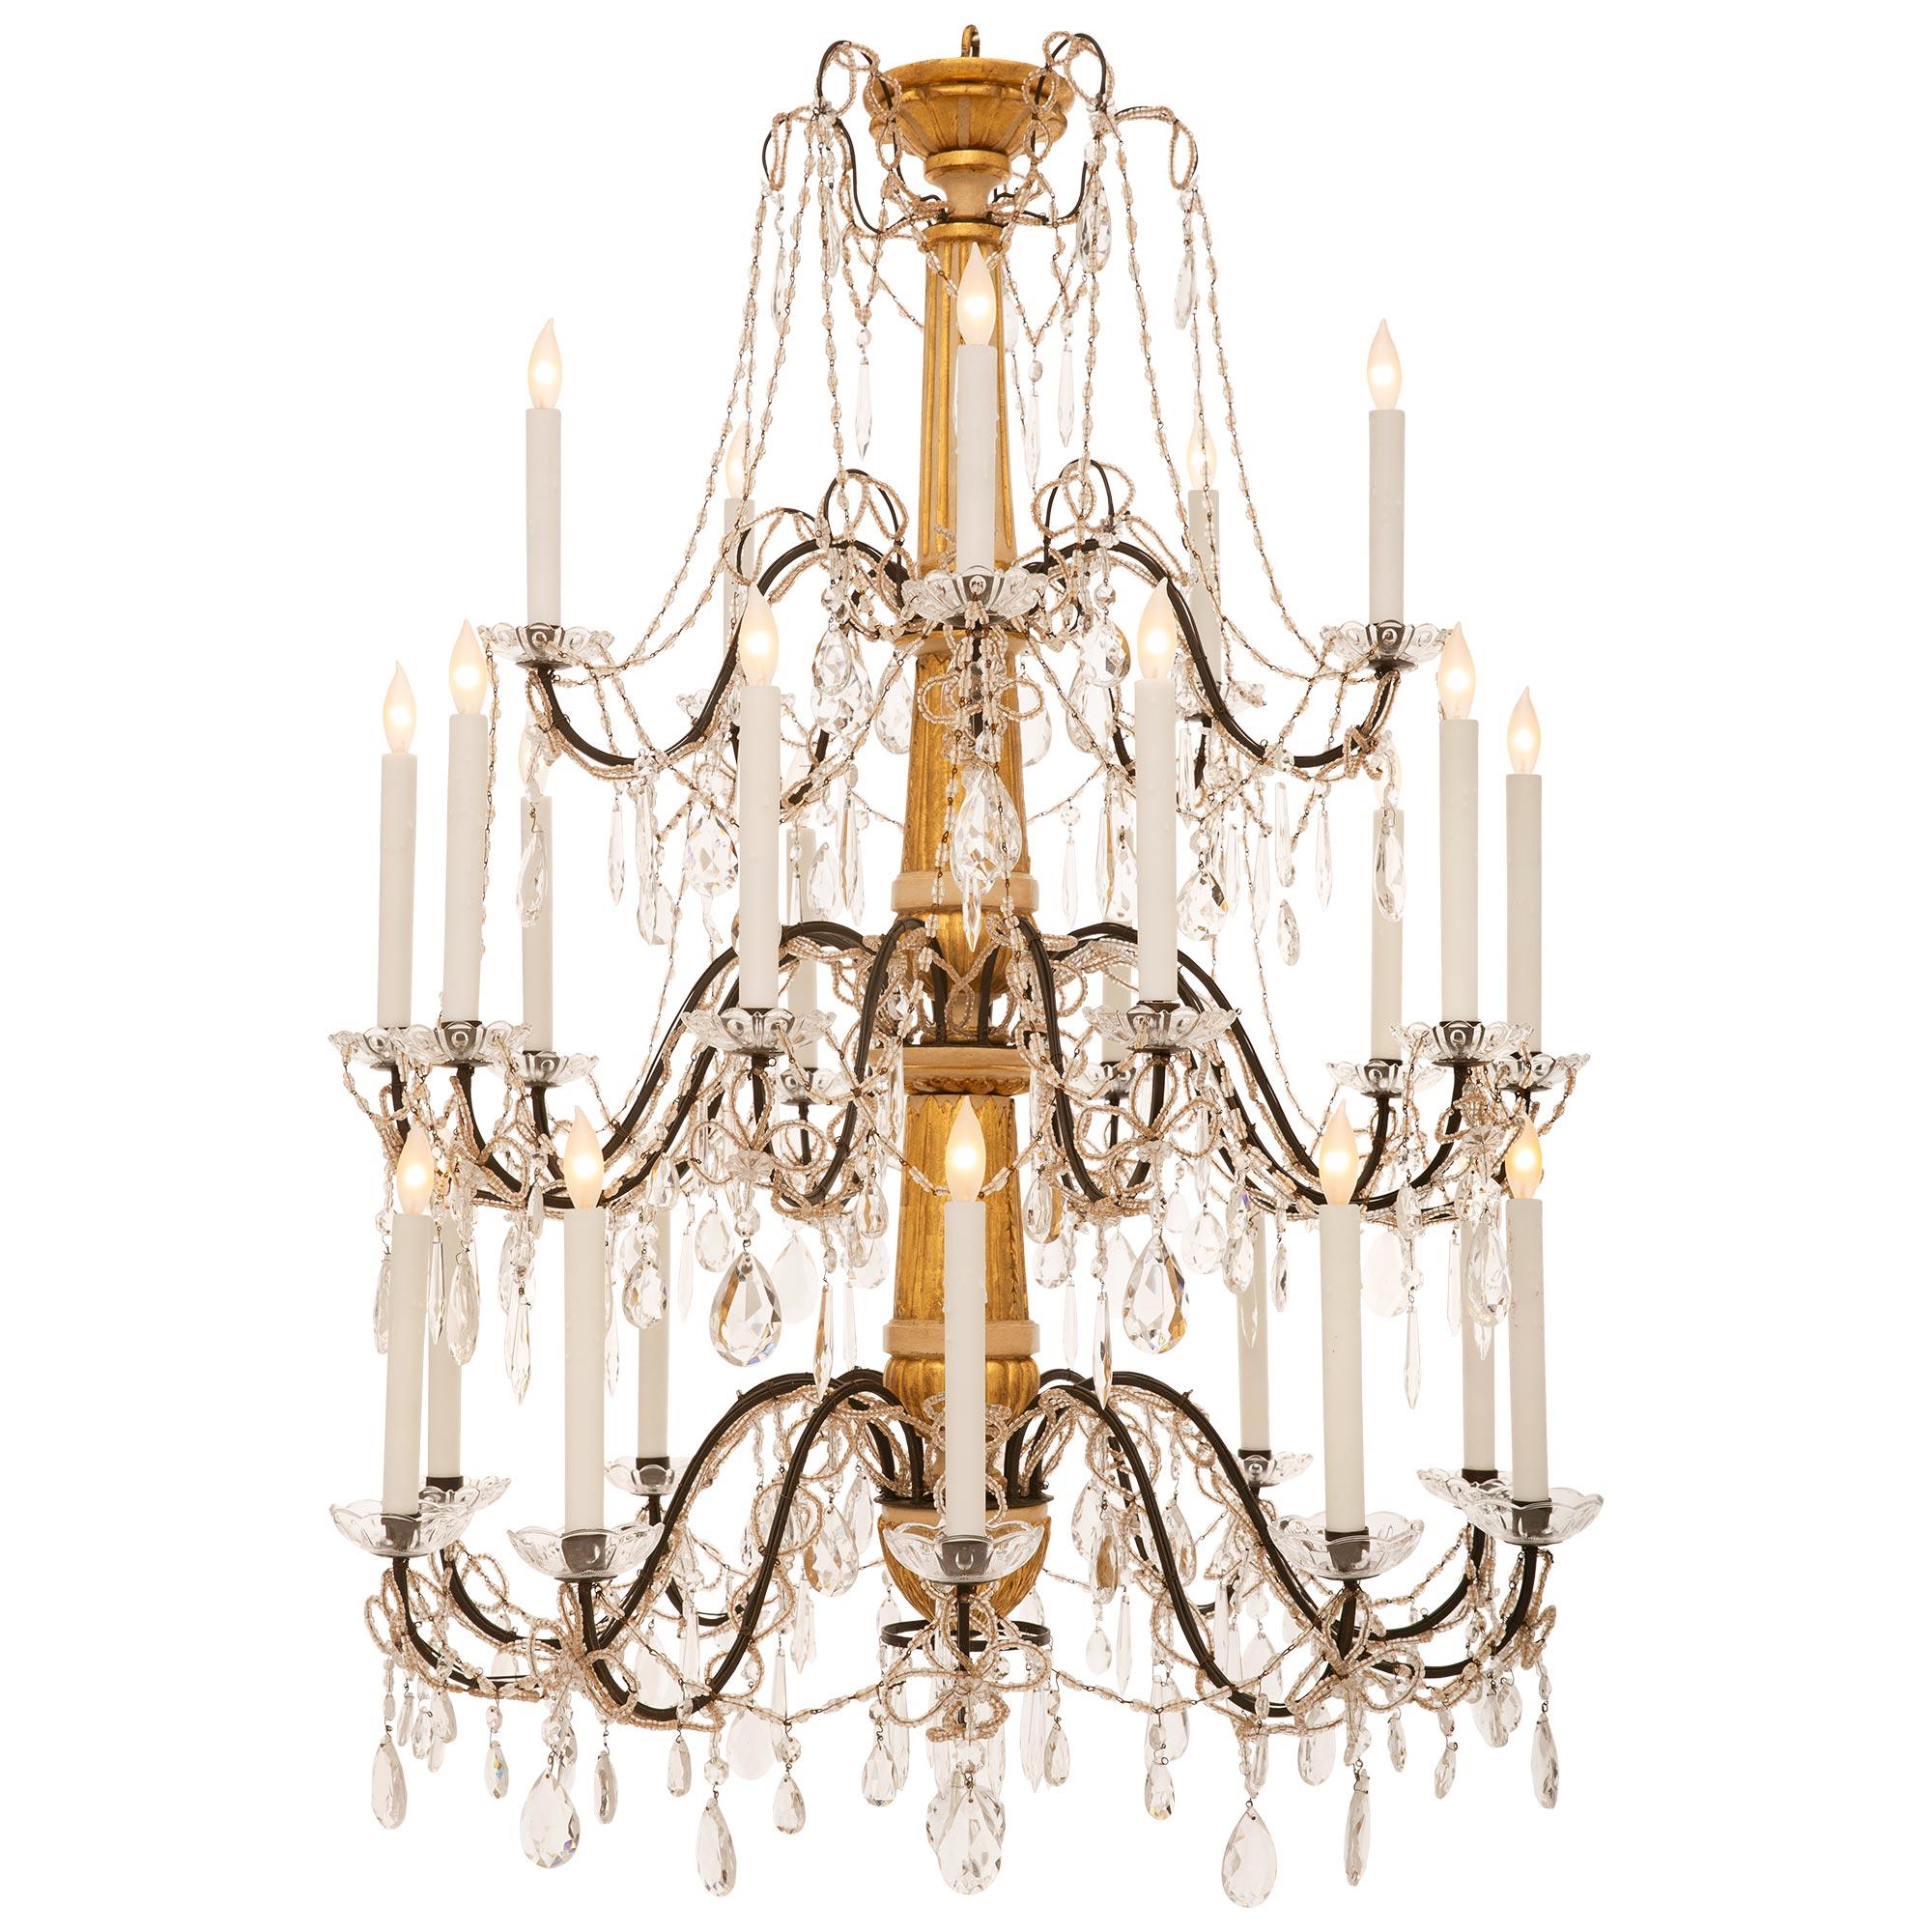 Italian 19th Century Giltwood, Patinated Wood, Iron And Crystal Chandelier For Sale 6